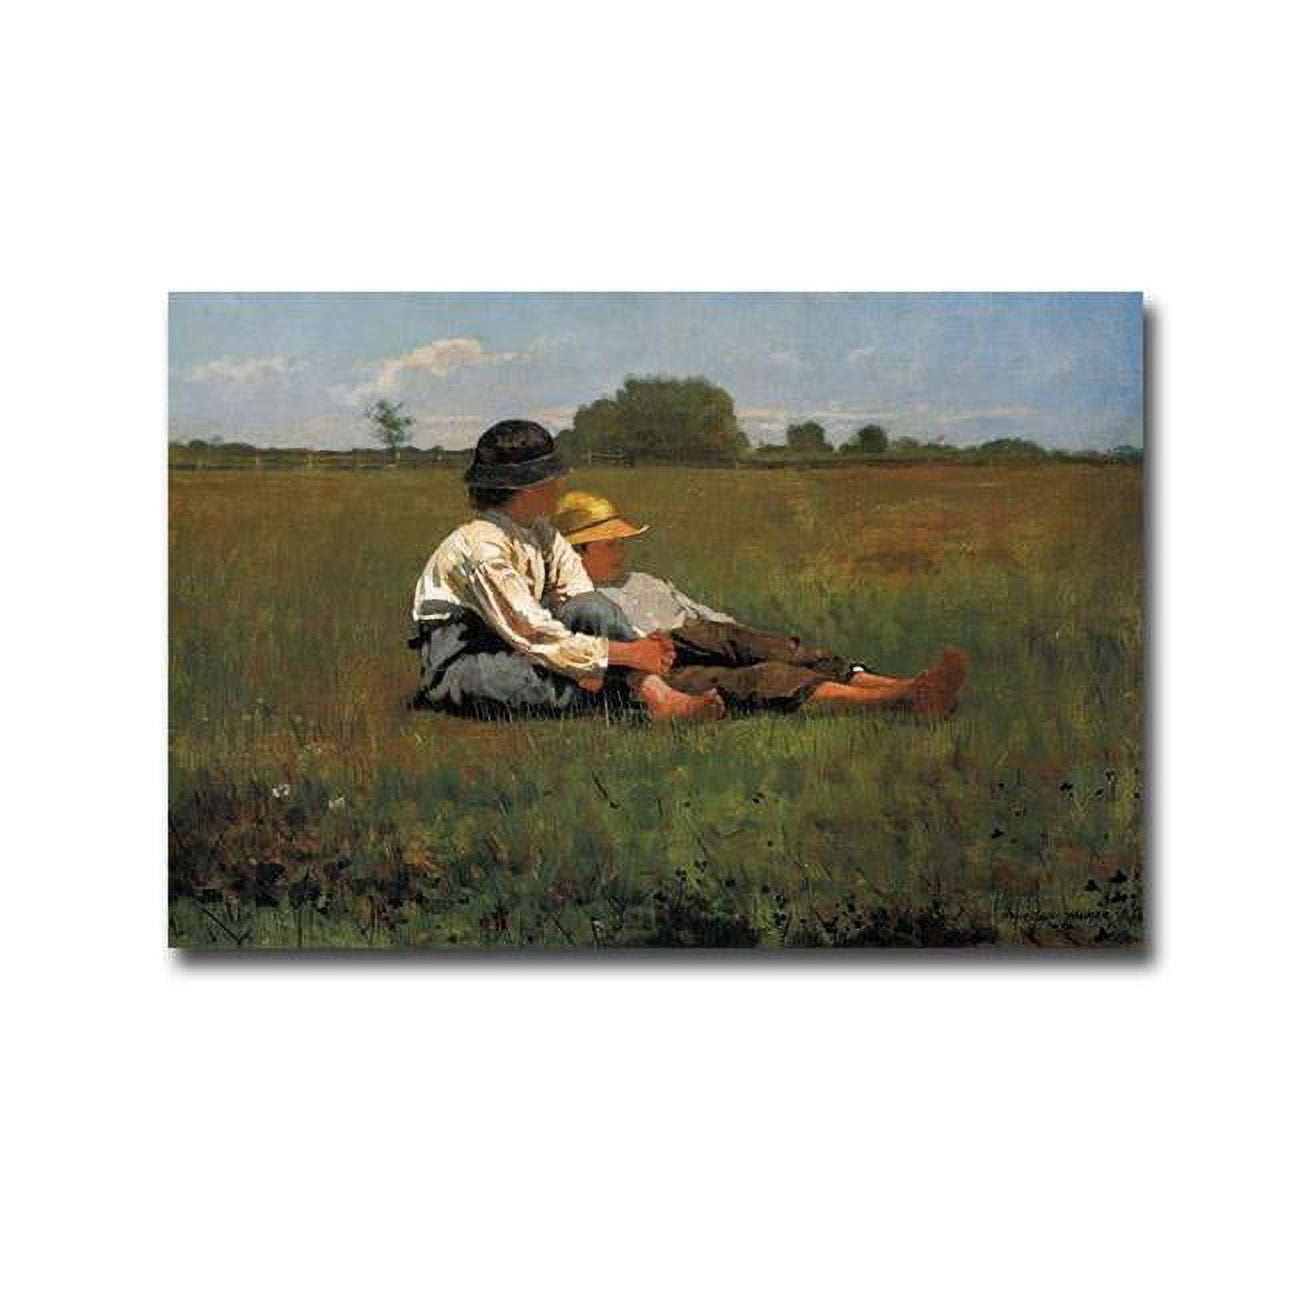 1624956bg Boys In A Pasture By Winslow Homer Premium Gallery-wrapped Canvas Giclee Art - 16 X 24 X 1.5 In.